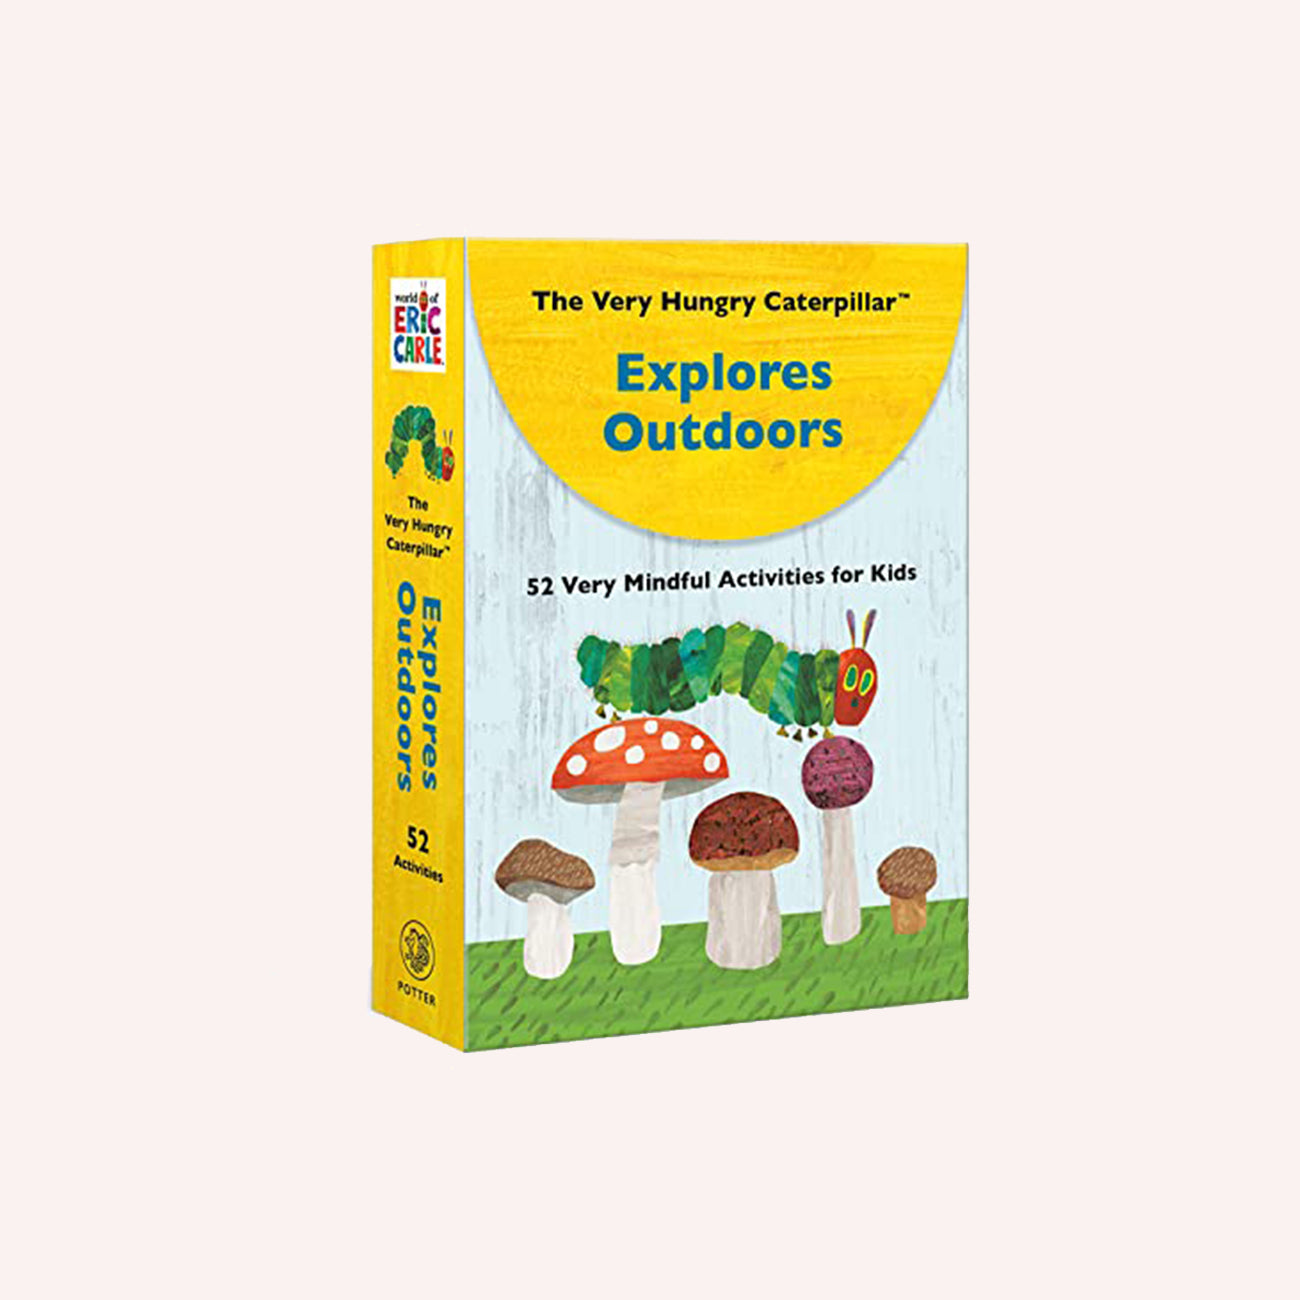 The Very Hungry Caterpillar Explores Outdoors